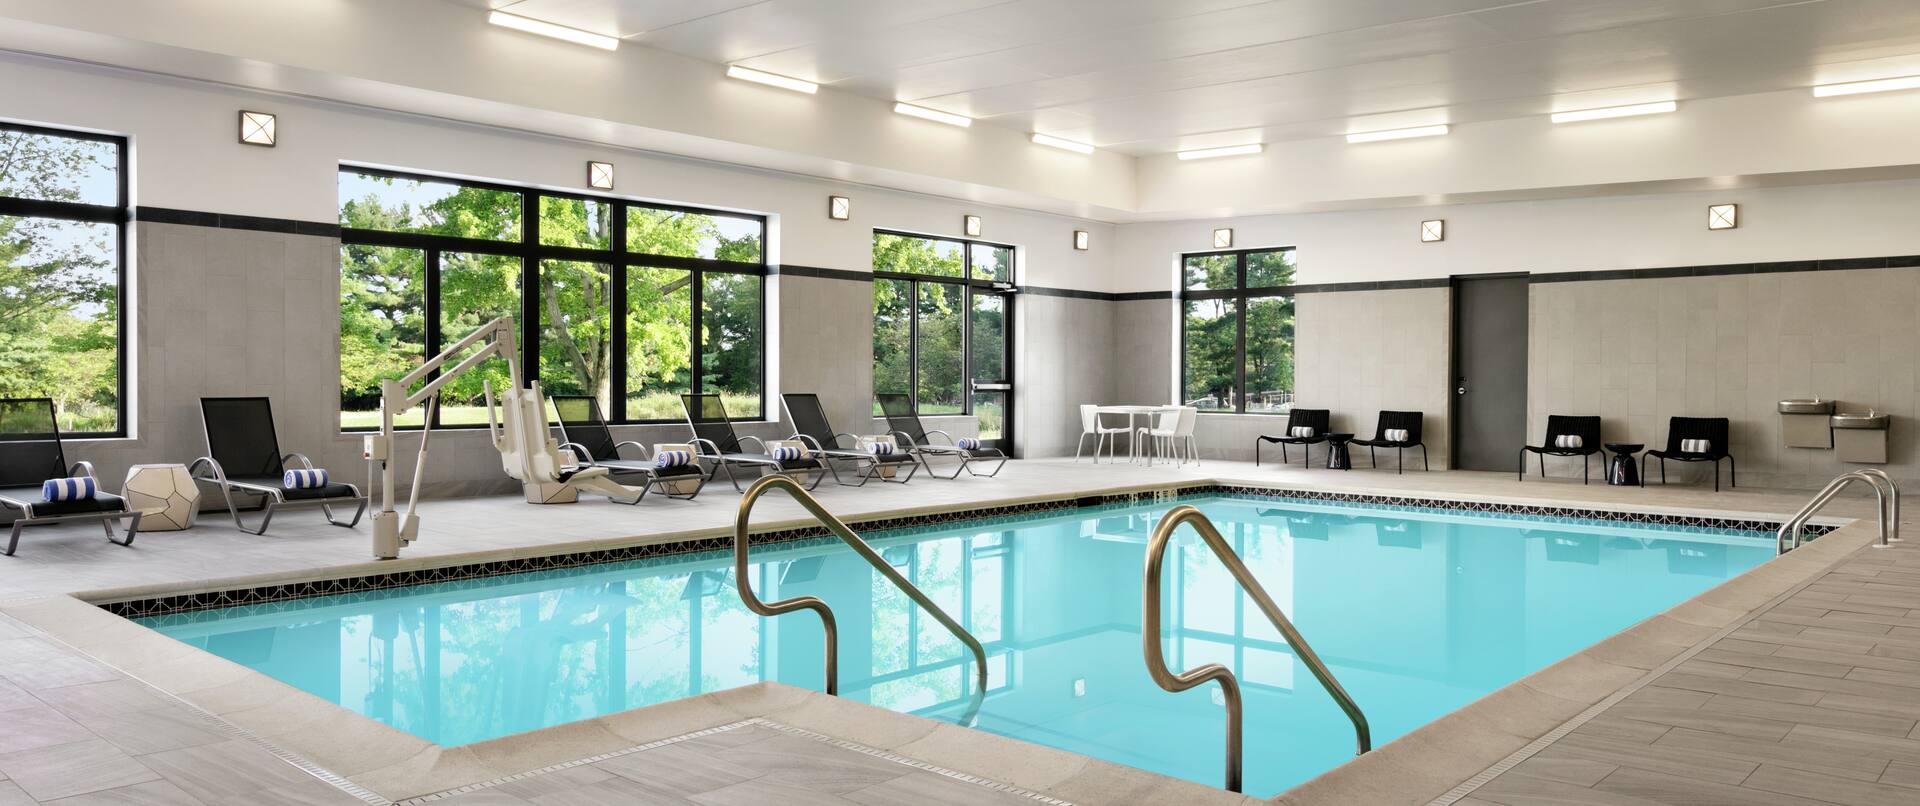 Indoor swimming pool featuring large windows with beautiful outside view, lounge chairs, and accessible chair lift.